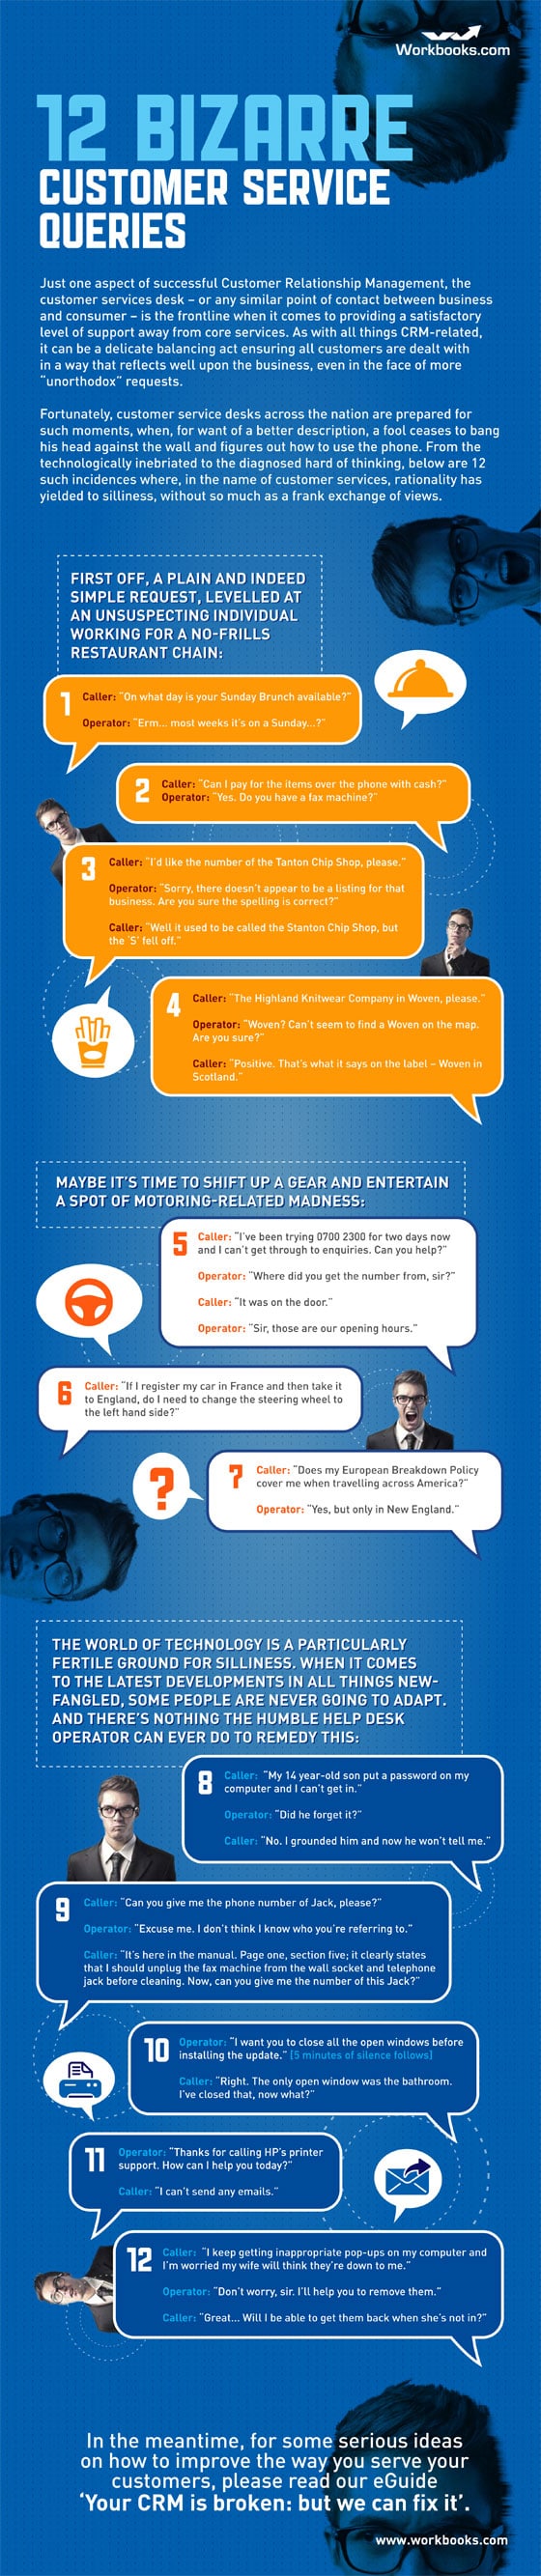 12 Hilariously Bizarre Yet Real Customer Service Queries [Infographic]